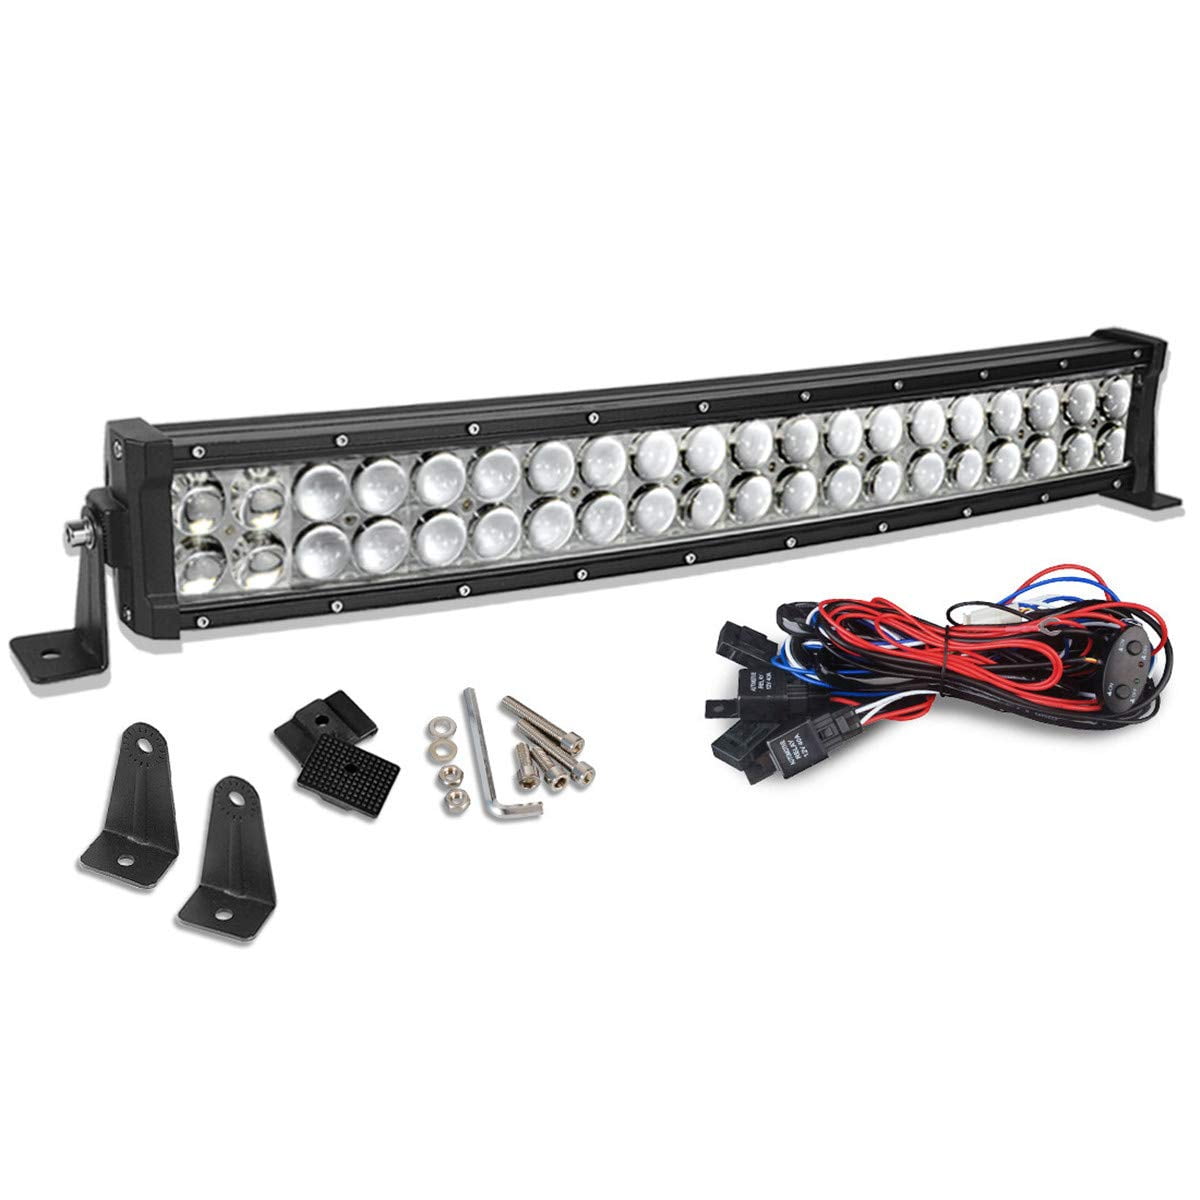 22'' 280W CREE LED WORK LIGHT BAR 4" 18W COMBO 4X4WD Light For JEEP FORD ATV 